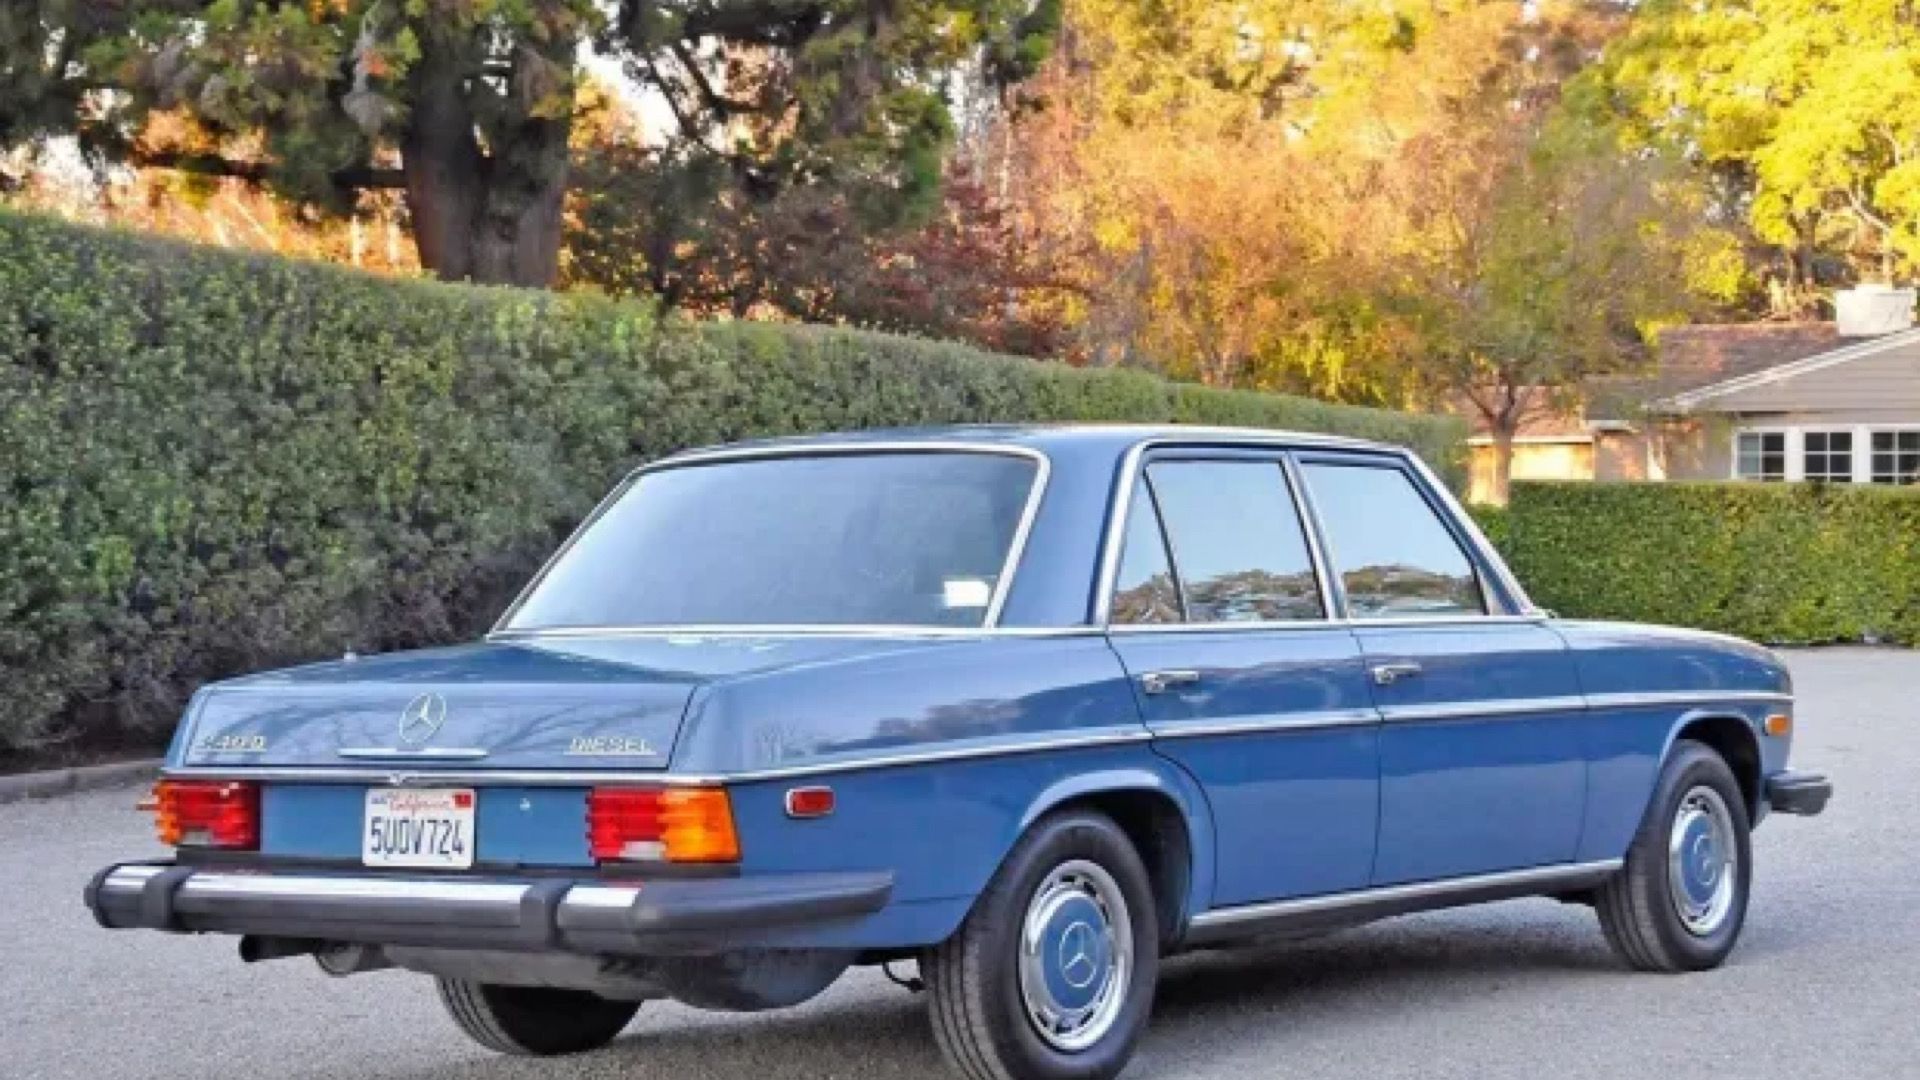 1976 Mercedes-Benz 240D in blue Posing in front of hedge in driveway